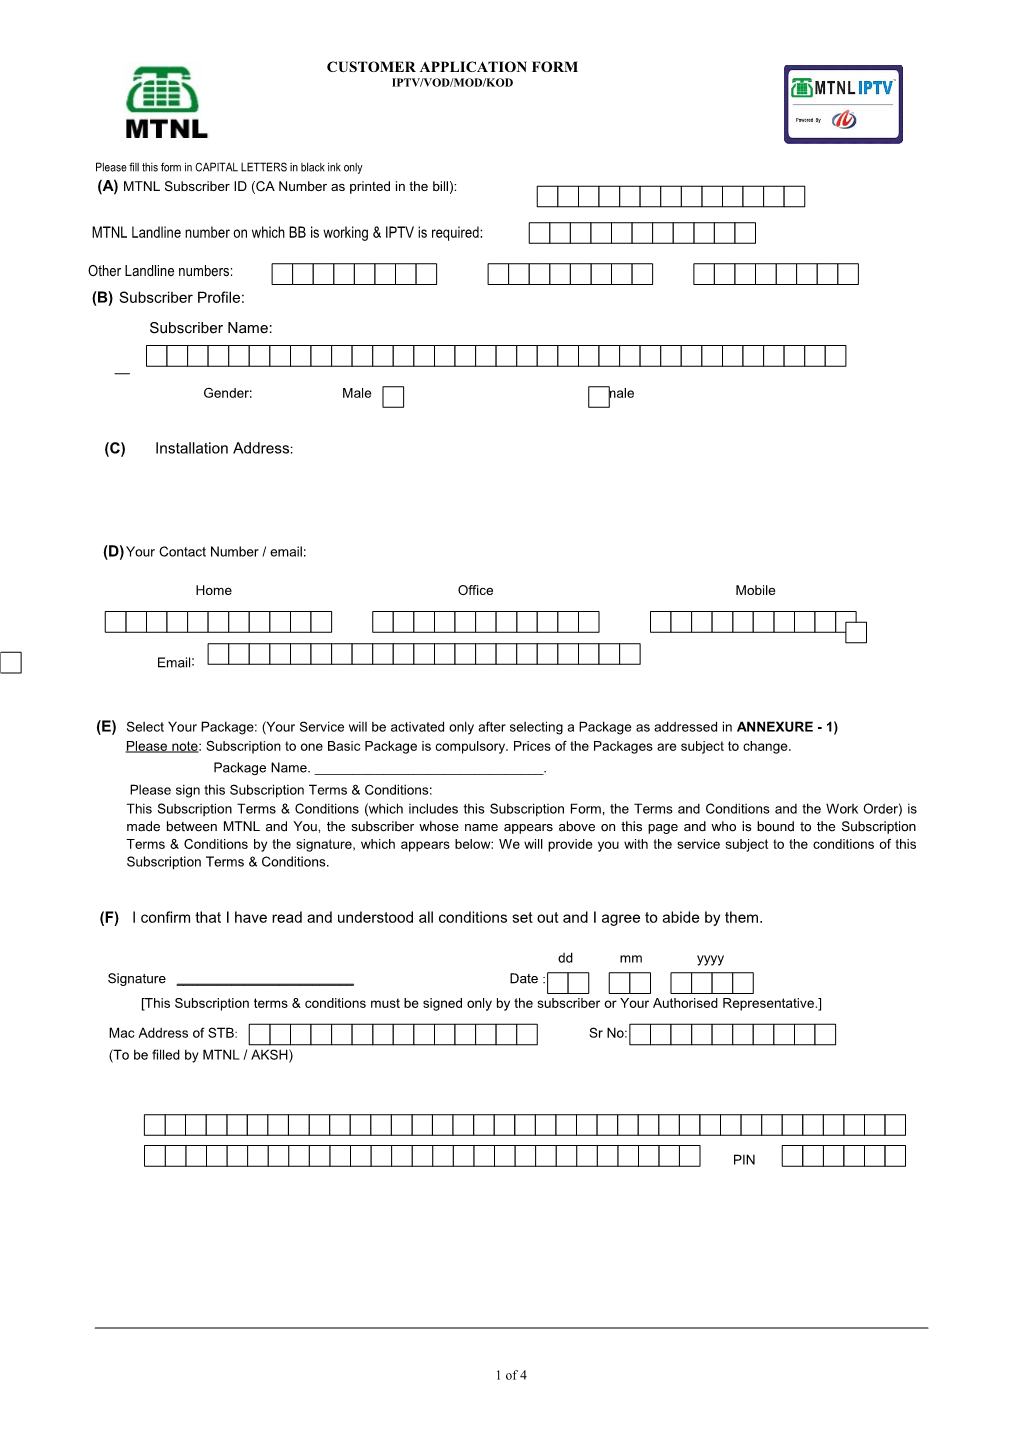 Please Fill This Form in CAPITAL LETTERS in Black Ink Only